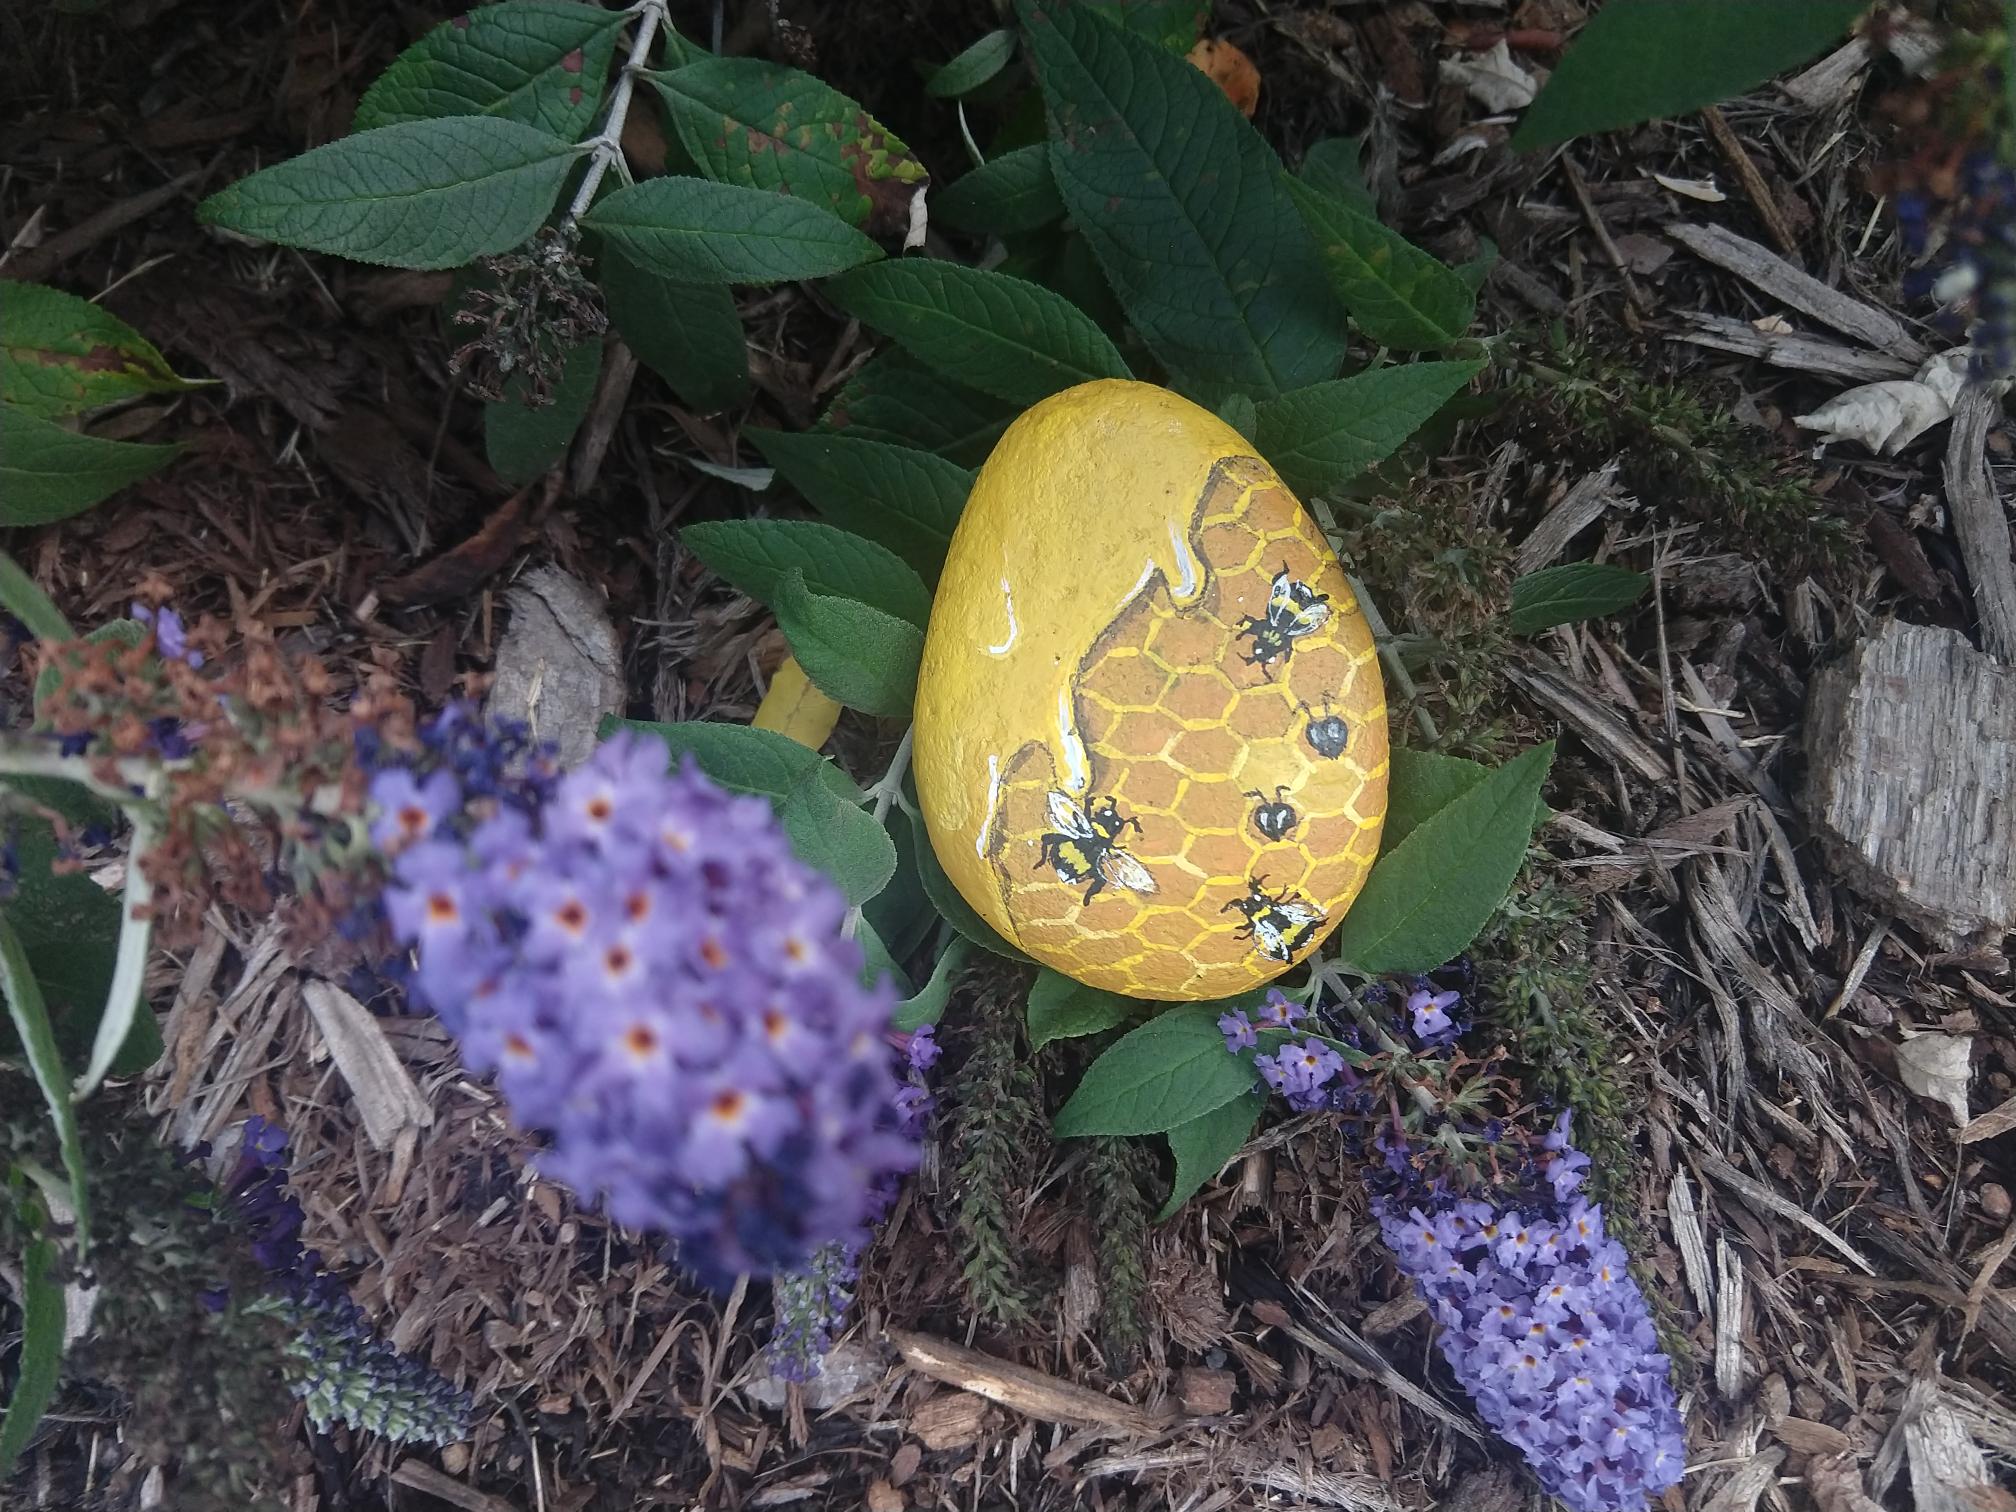 Yellow bees and honeycomb painted on a rock